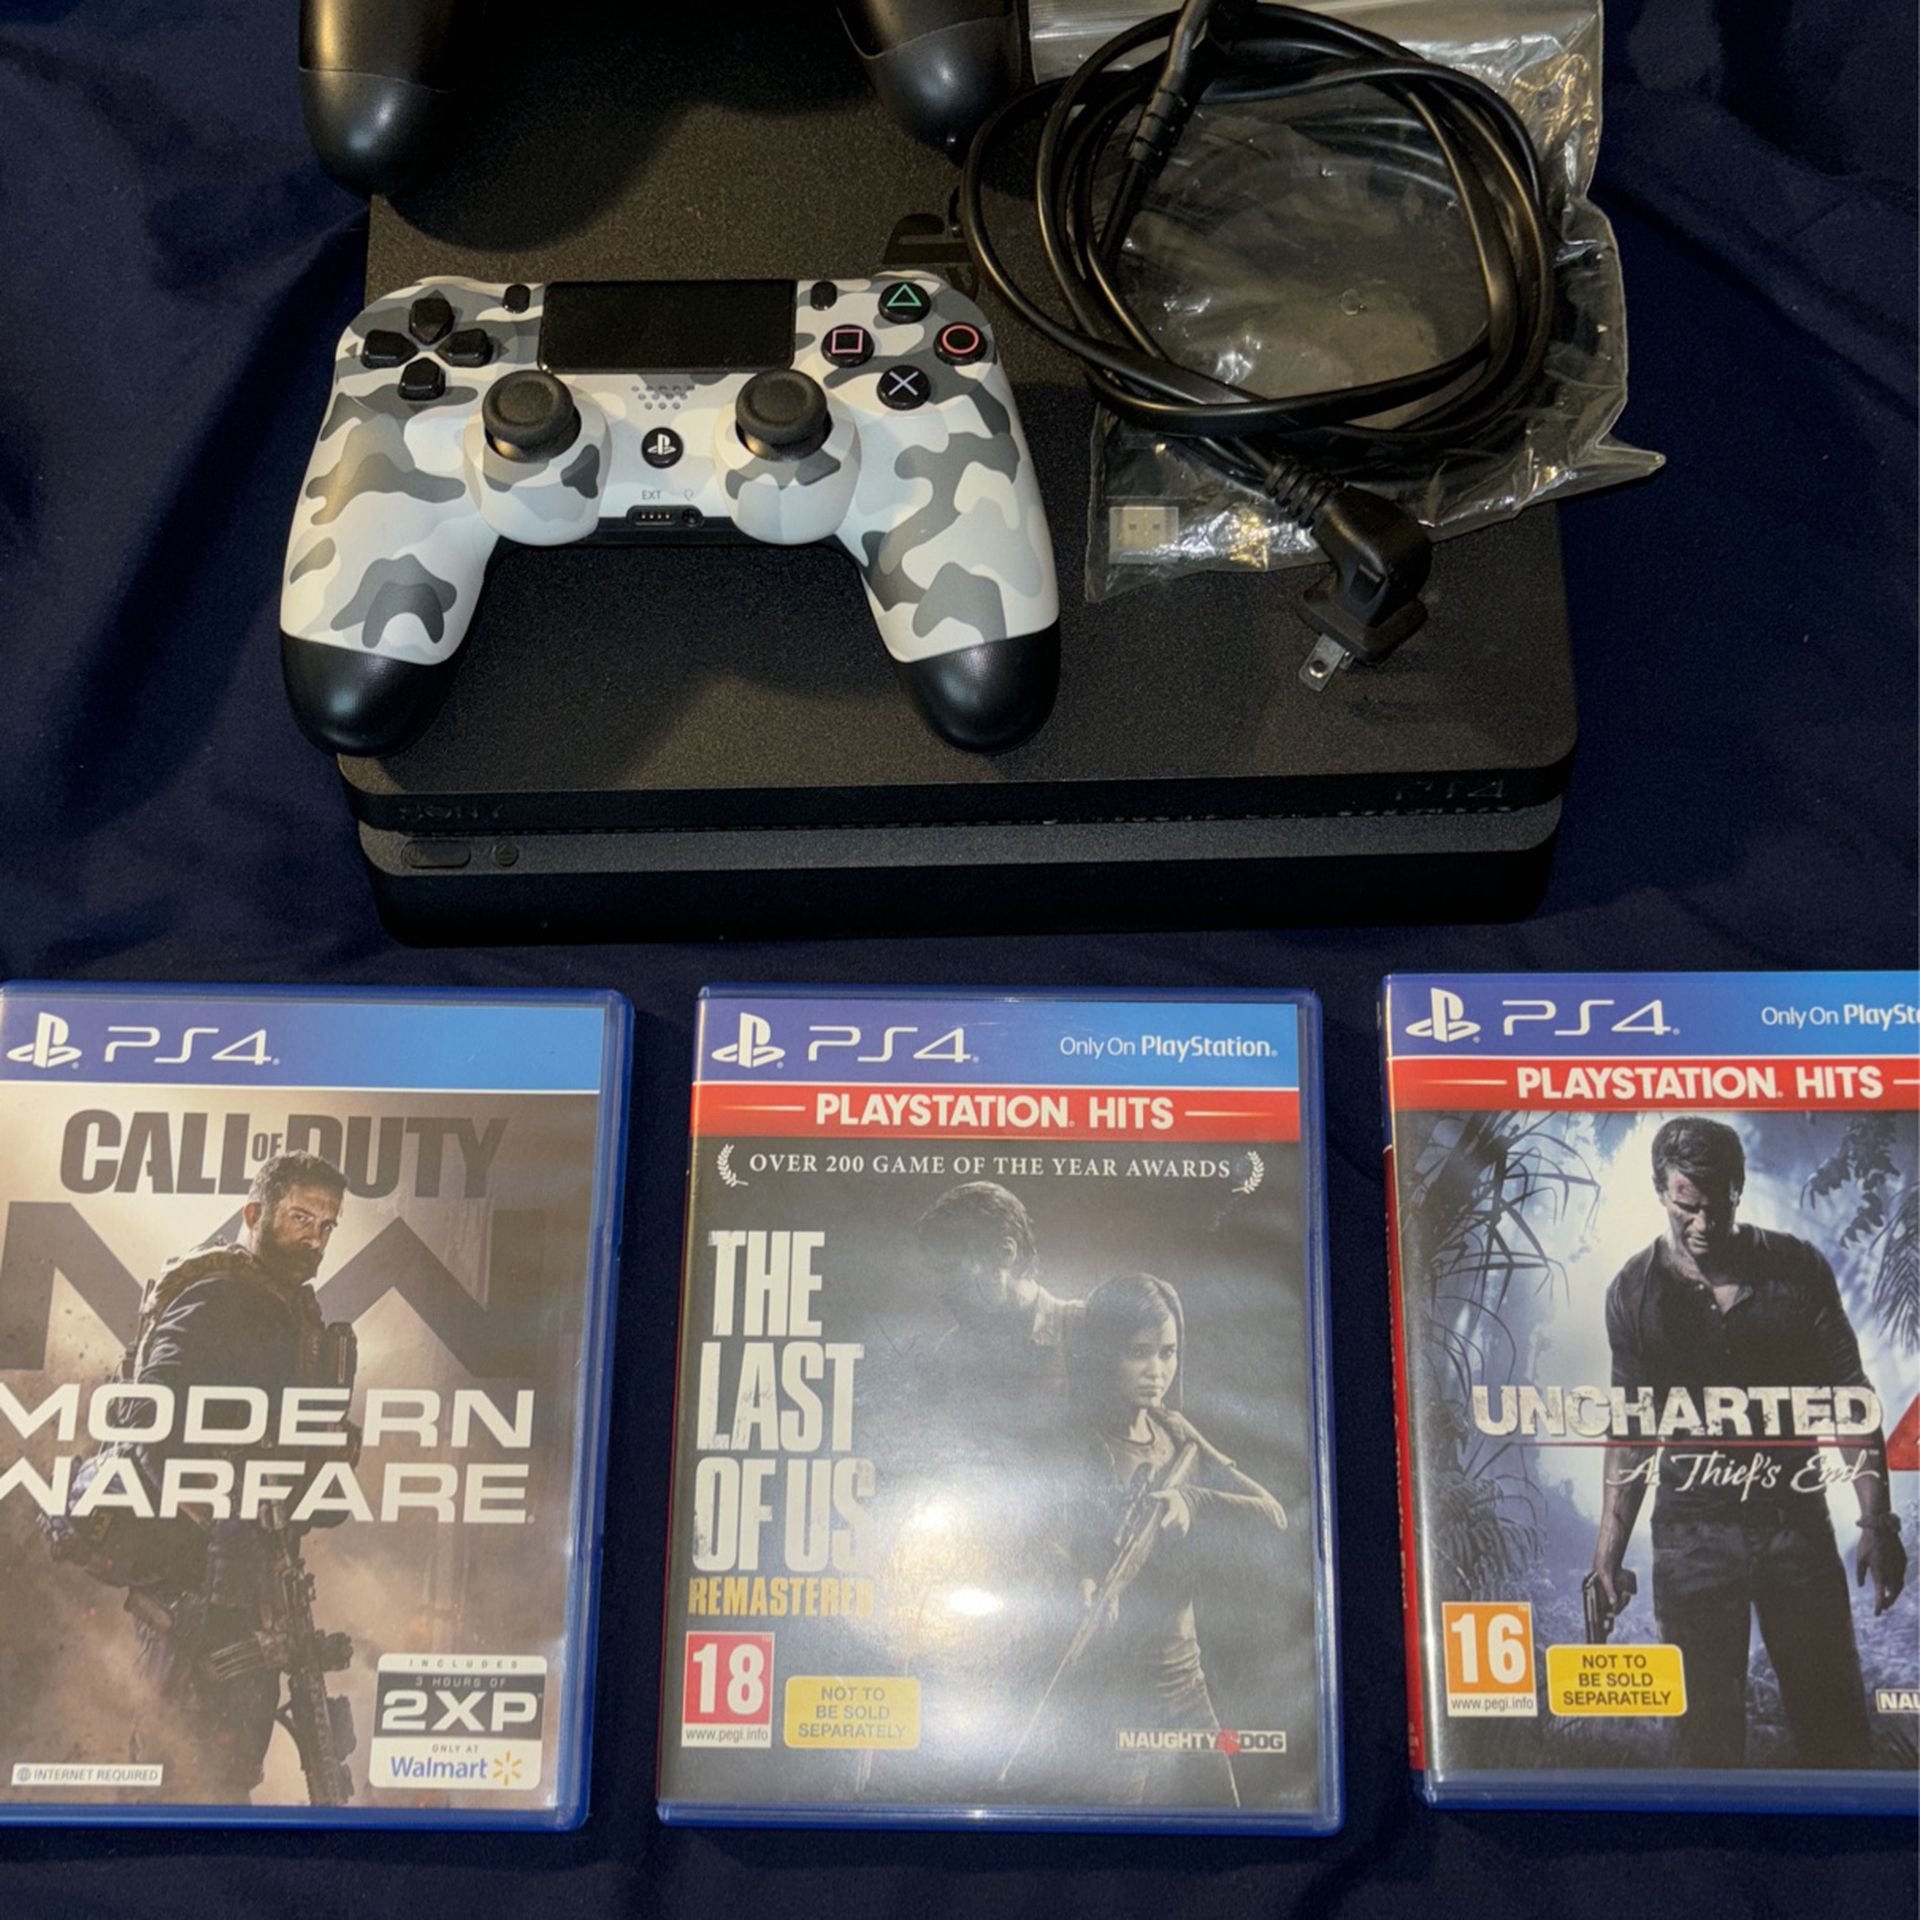 PS4 with Controllers and 3 PS4 Games